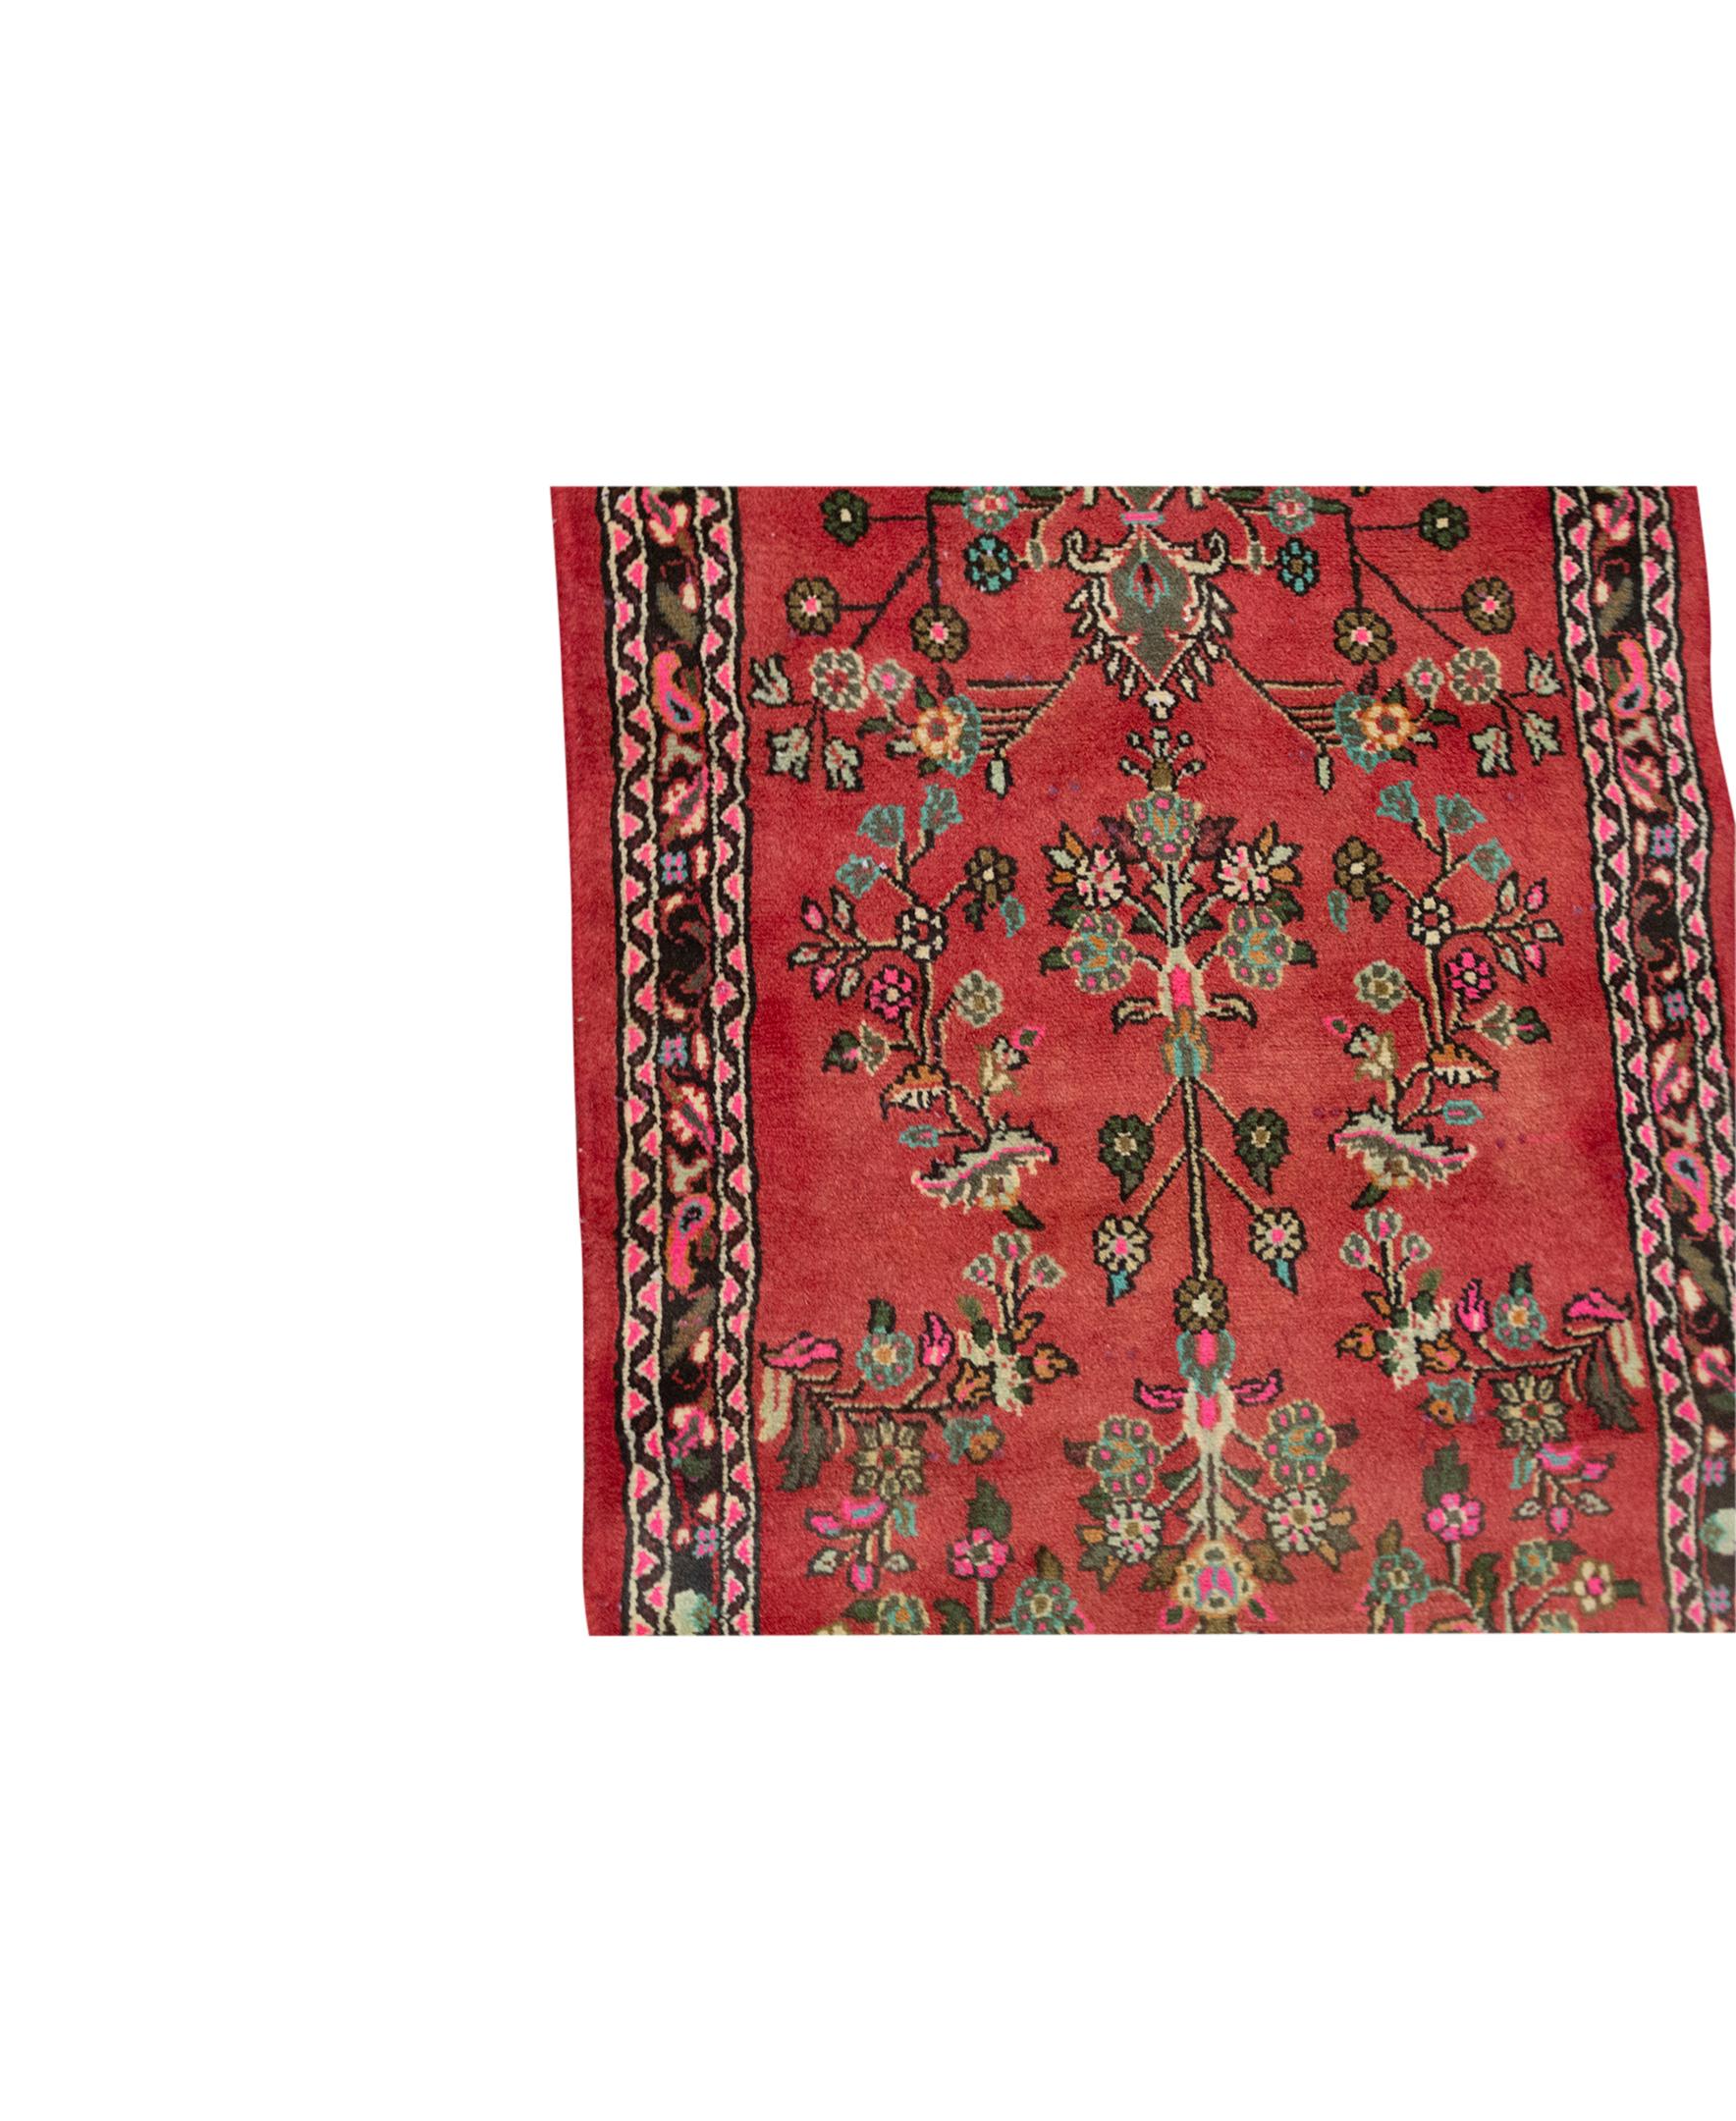   Antique Persian Fine Traditional Handwoven Luxury Wool Rose / Black Runner Rug.Size: 2'-6